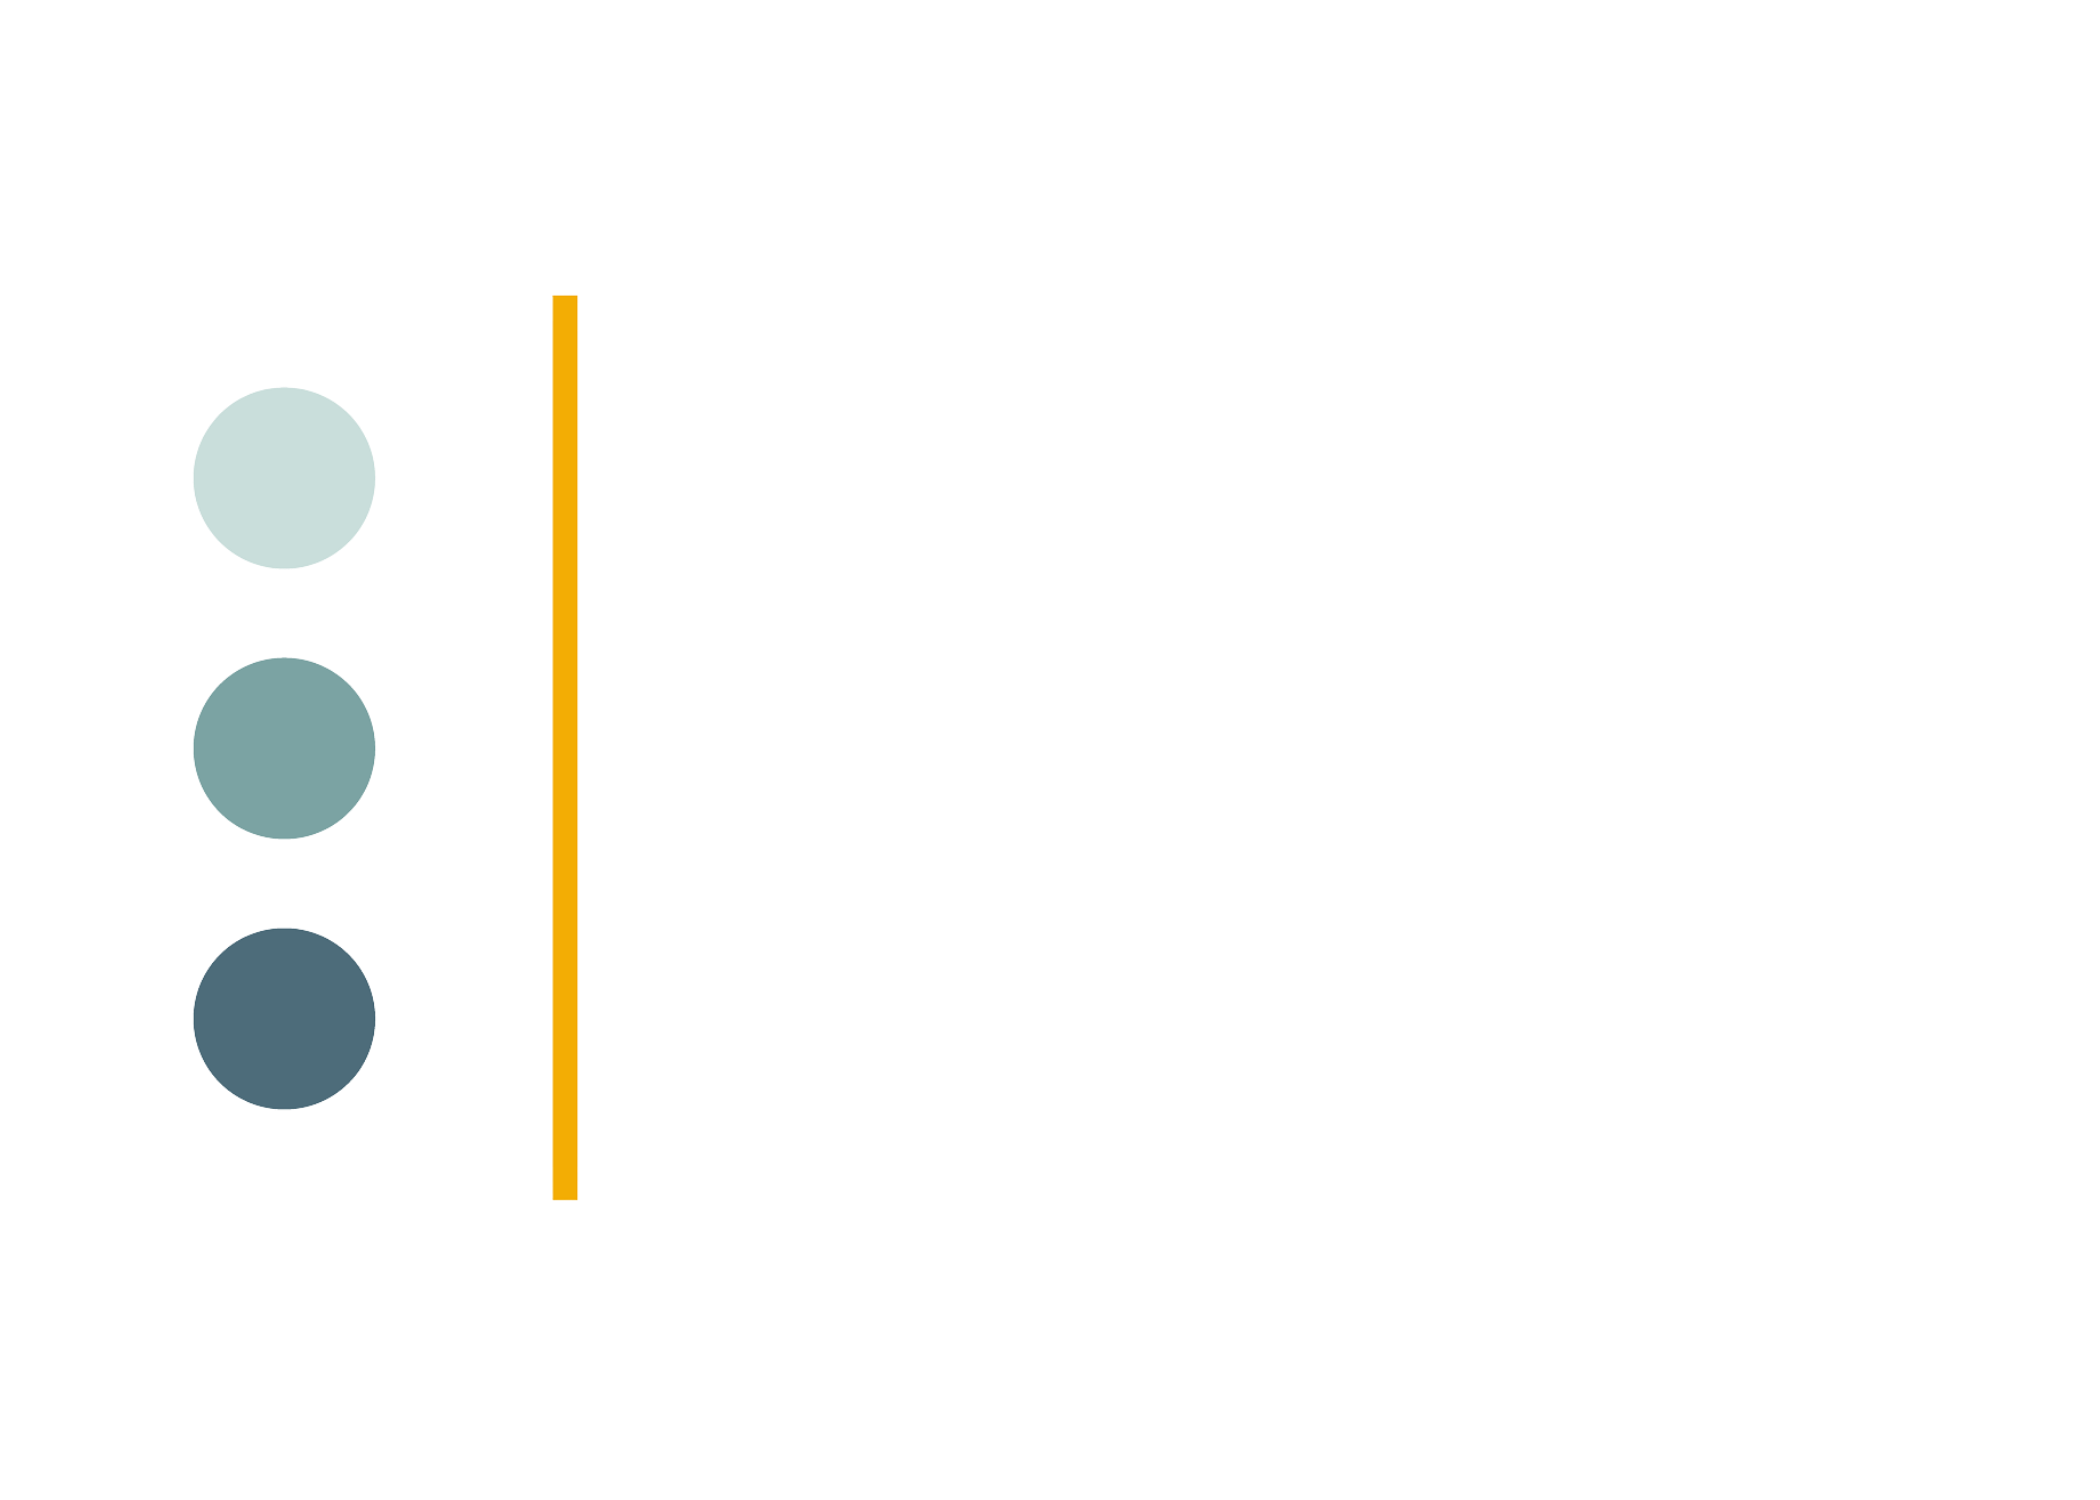 Coaching Focus Group - for dark backgrounds